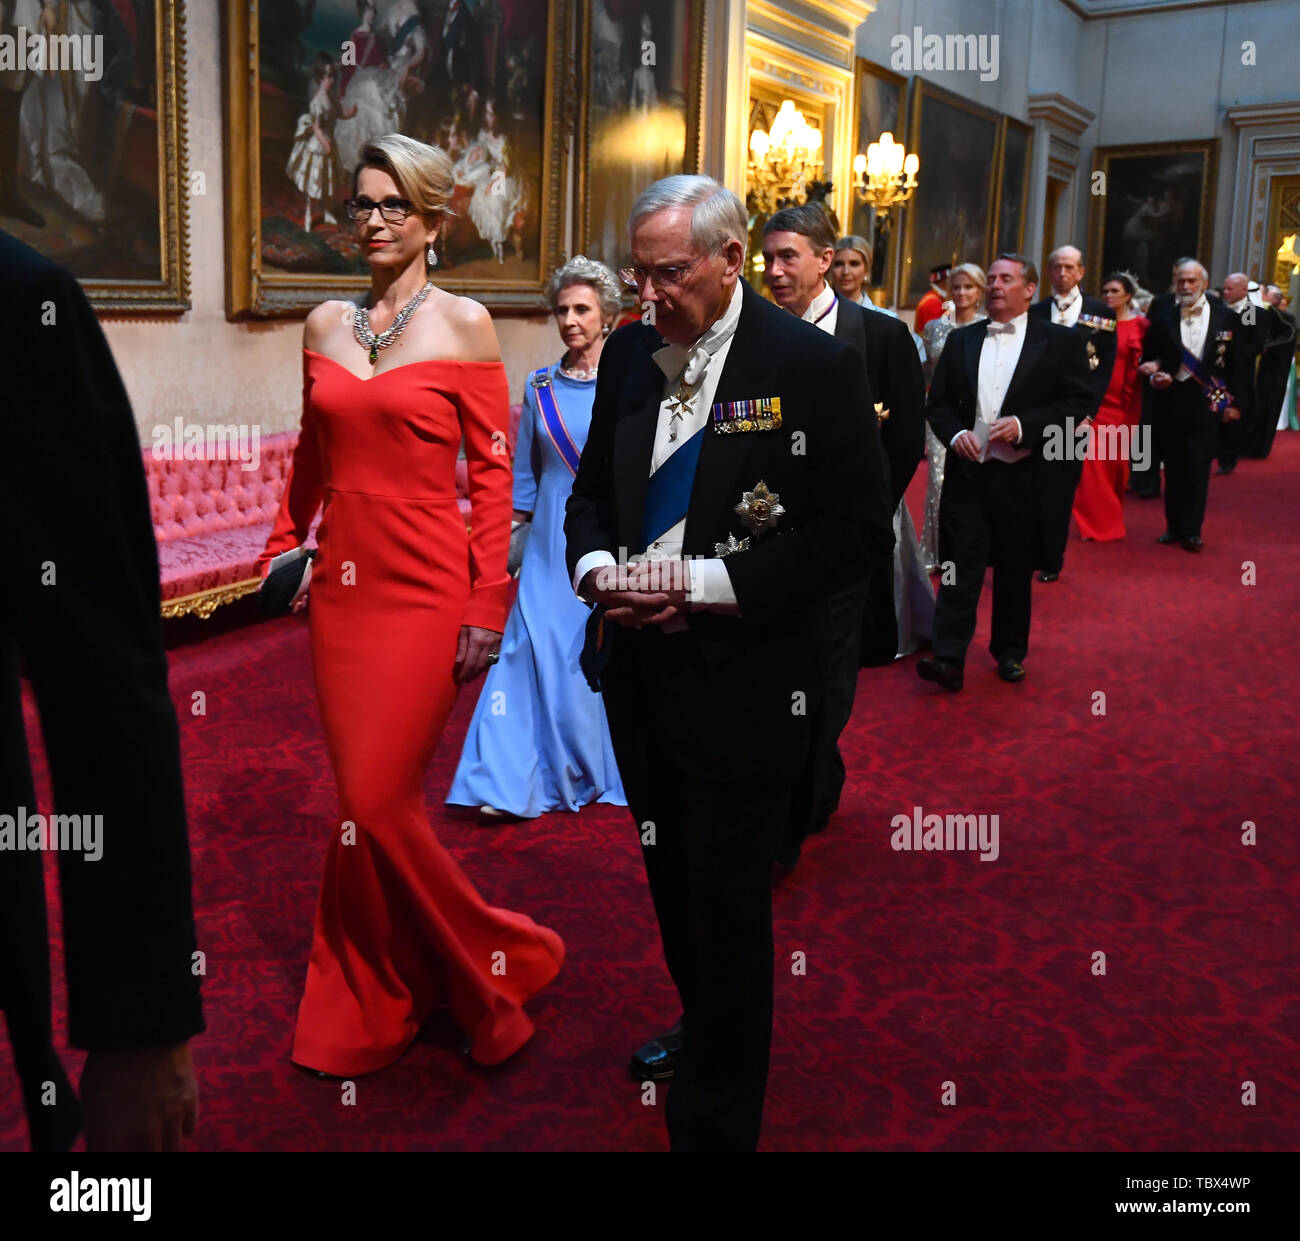 Ms Emma Walmsley and the Duke of Gloucester arrive through the East Gallery during the State Banquet at Buckingham Palace, London, on day one of the US President's three day state visit to the UK. Stock Photo